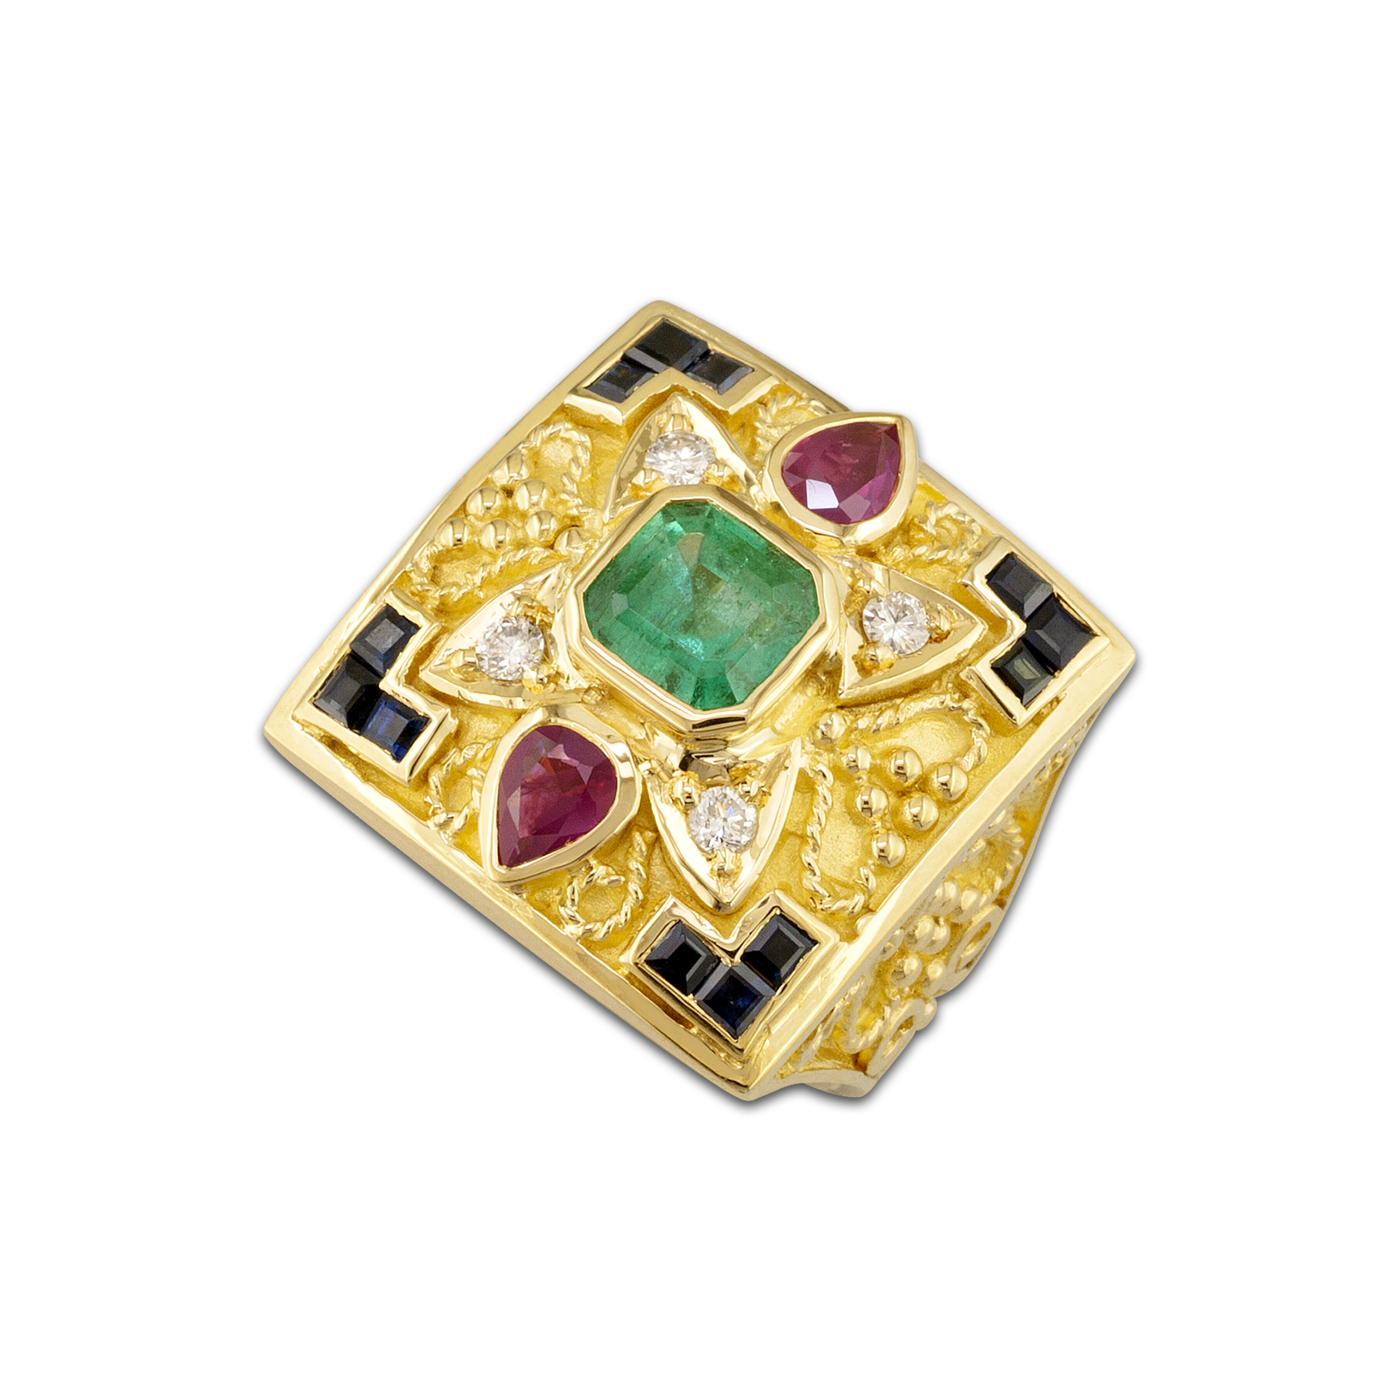 Imperial gold ring with precious stones